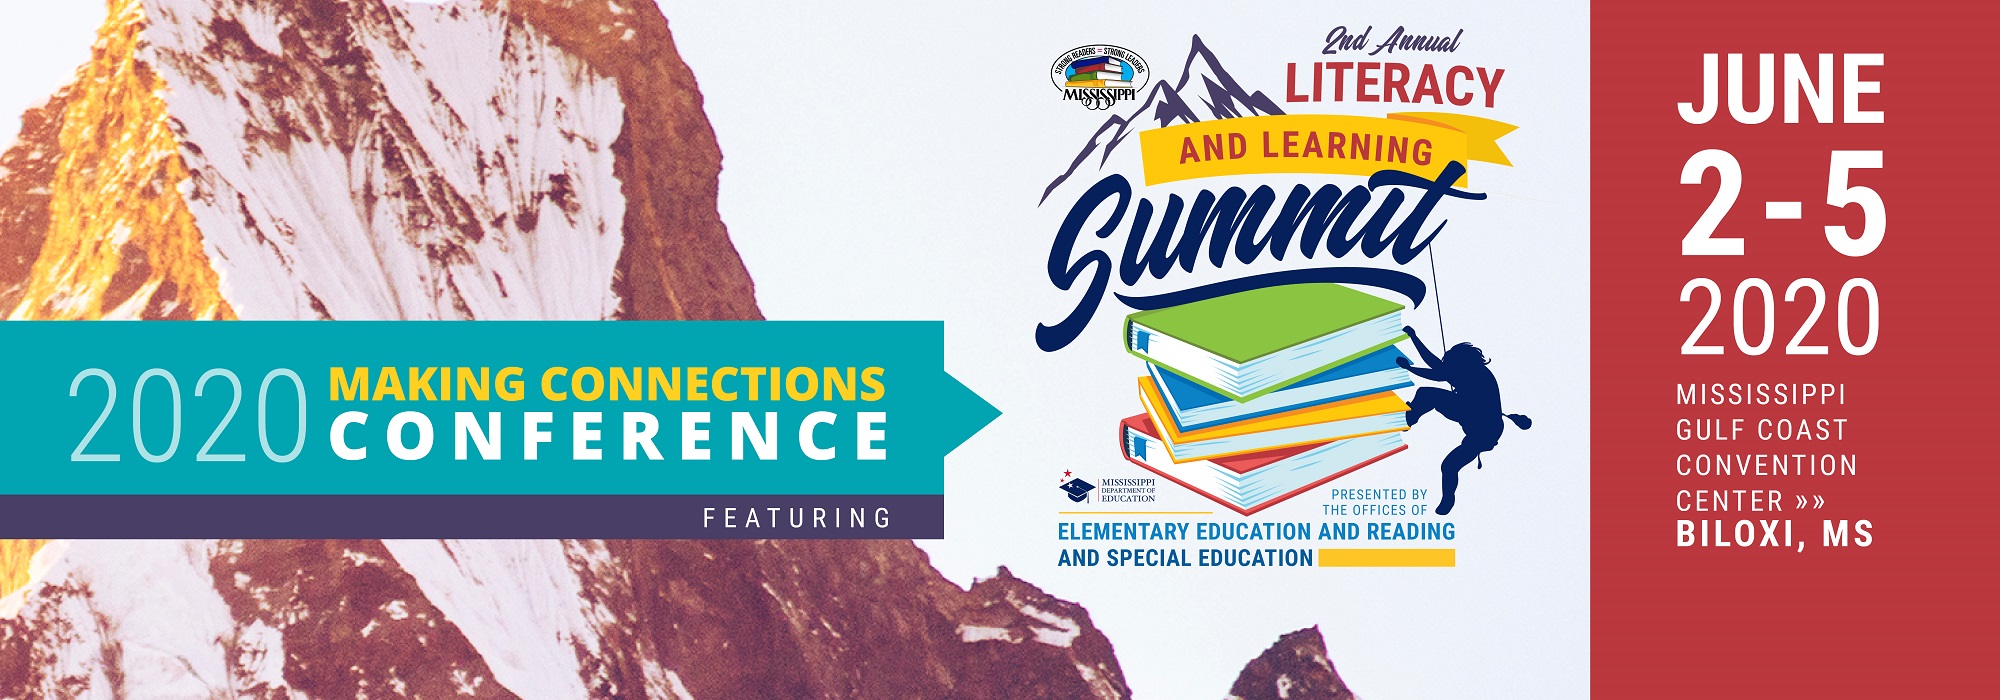 2020 Literacy and Learning Summit